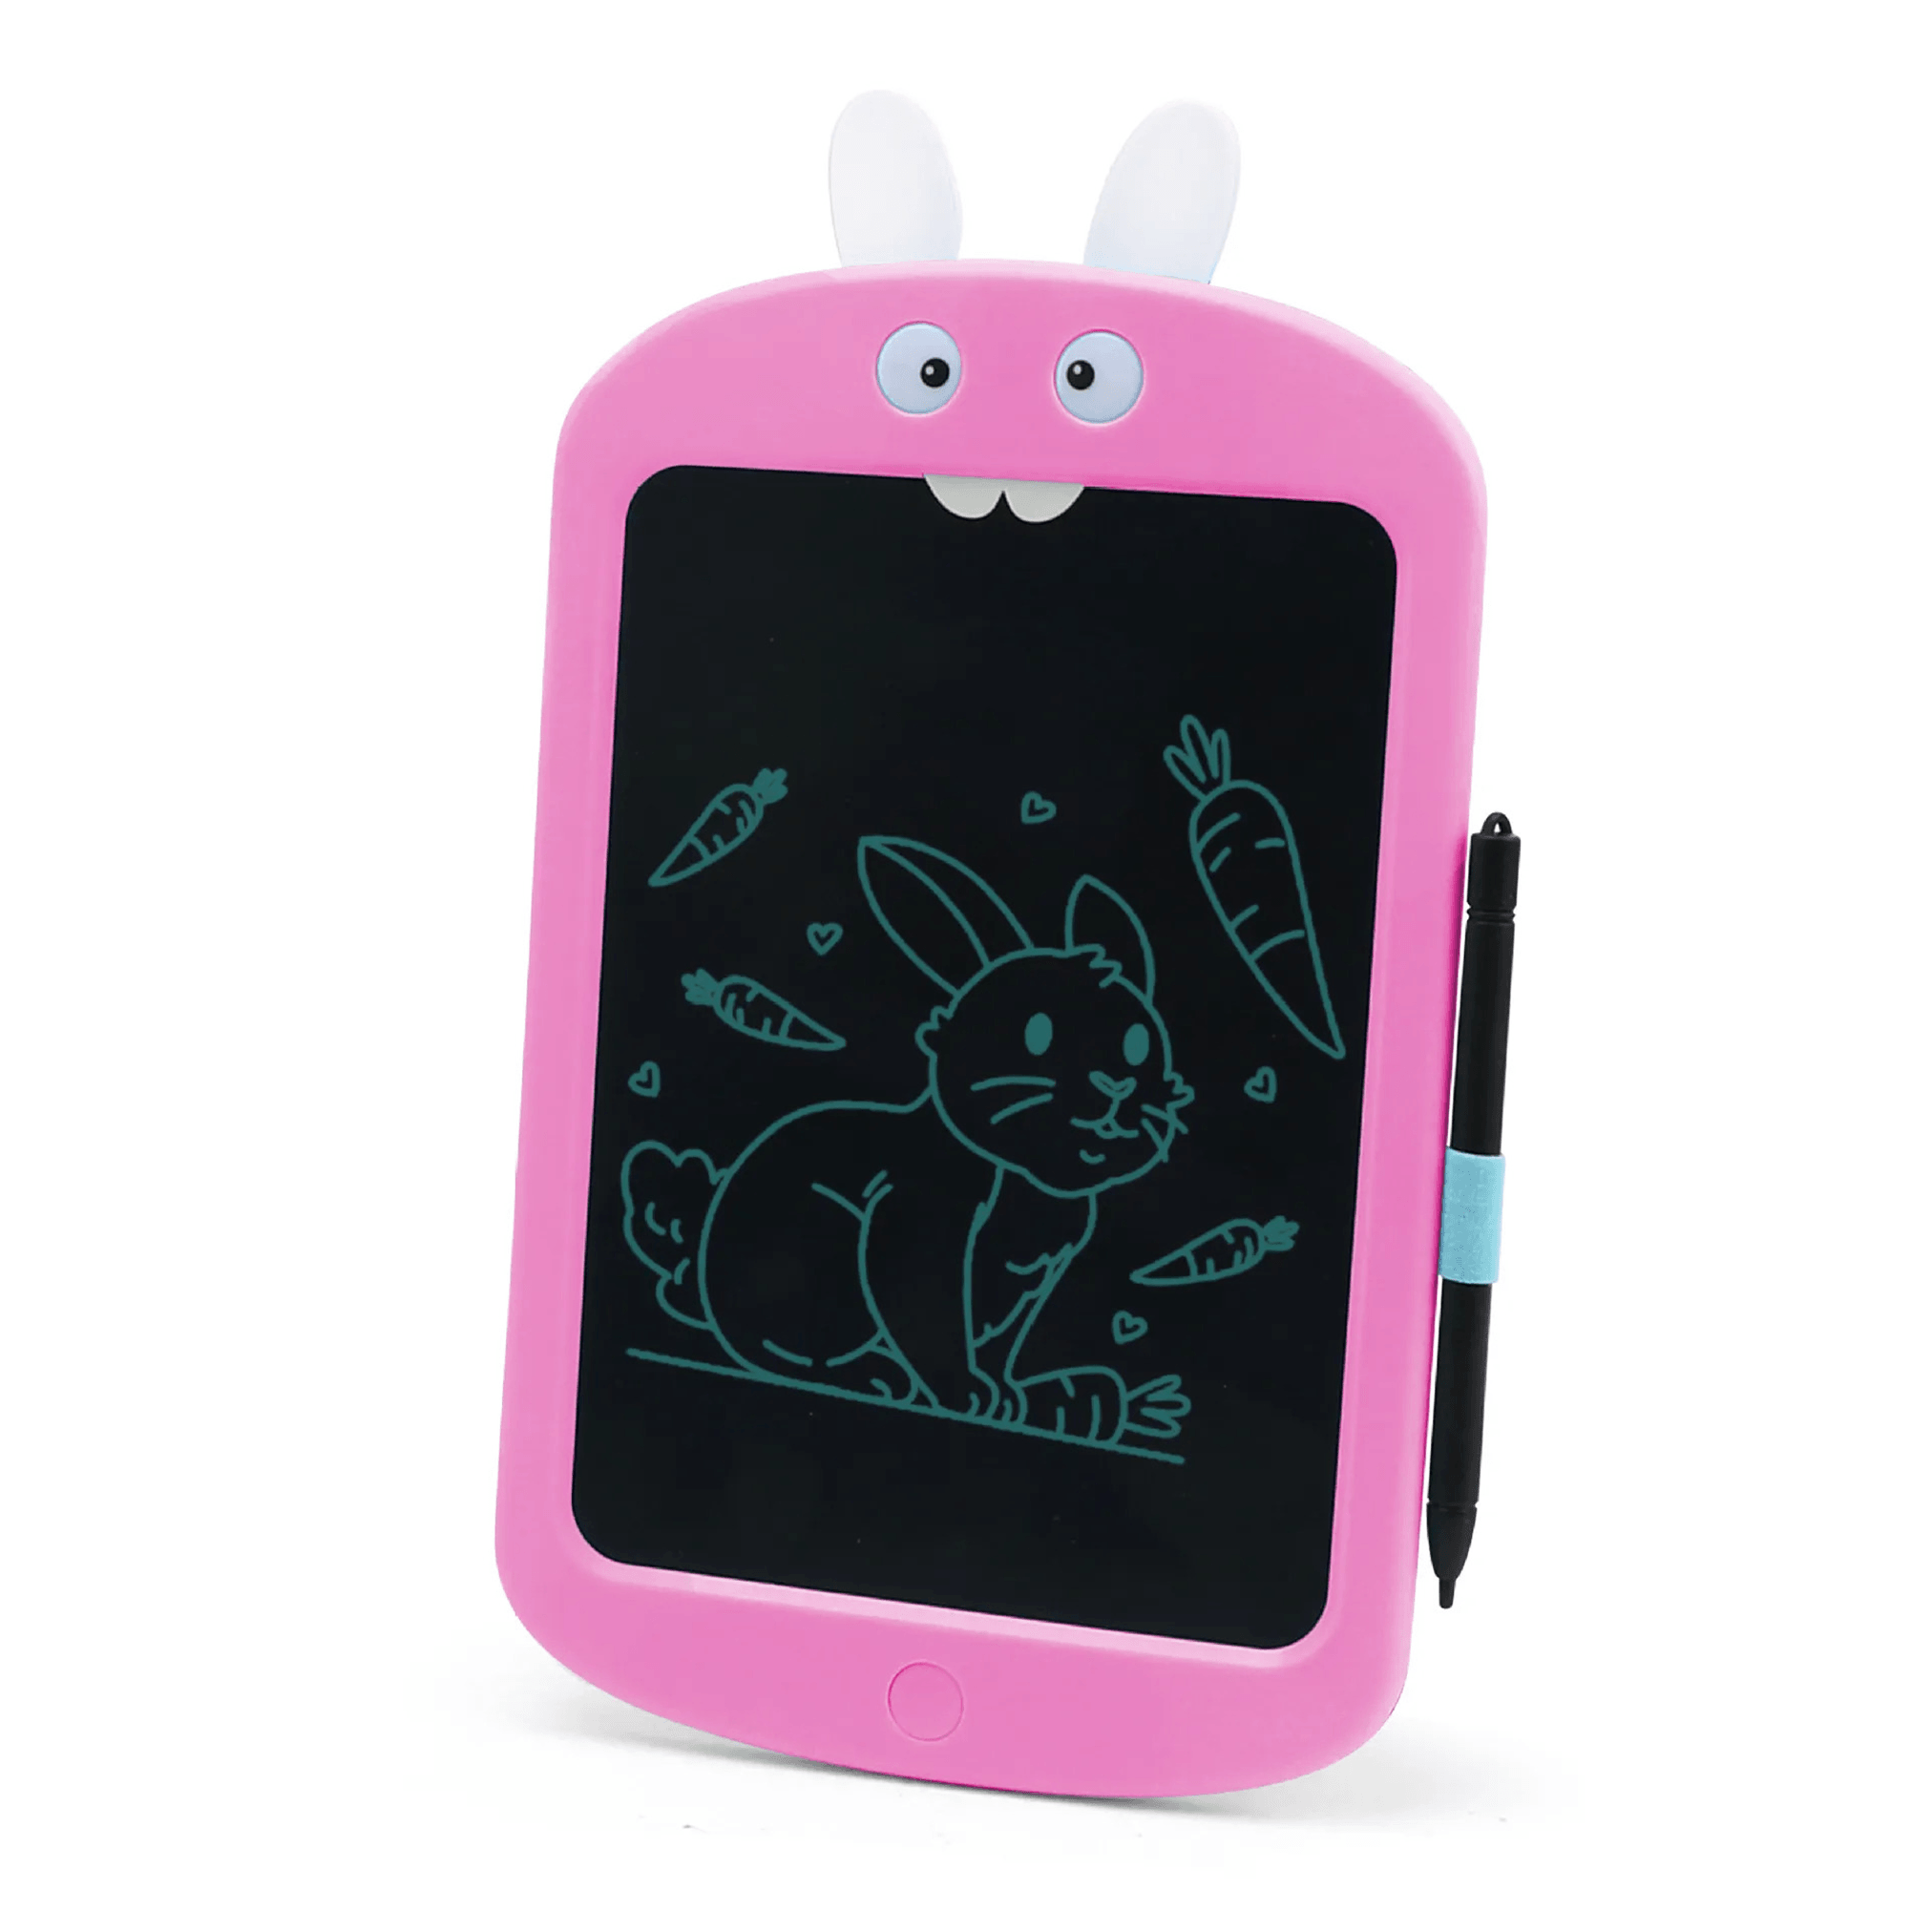 LCD Panel Colorful Writing Tablet 